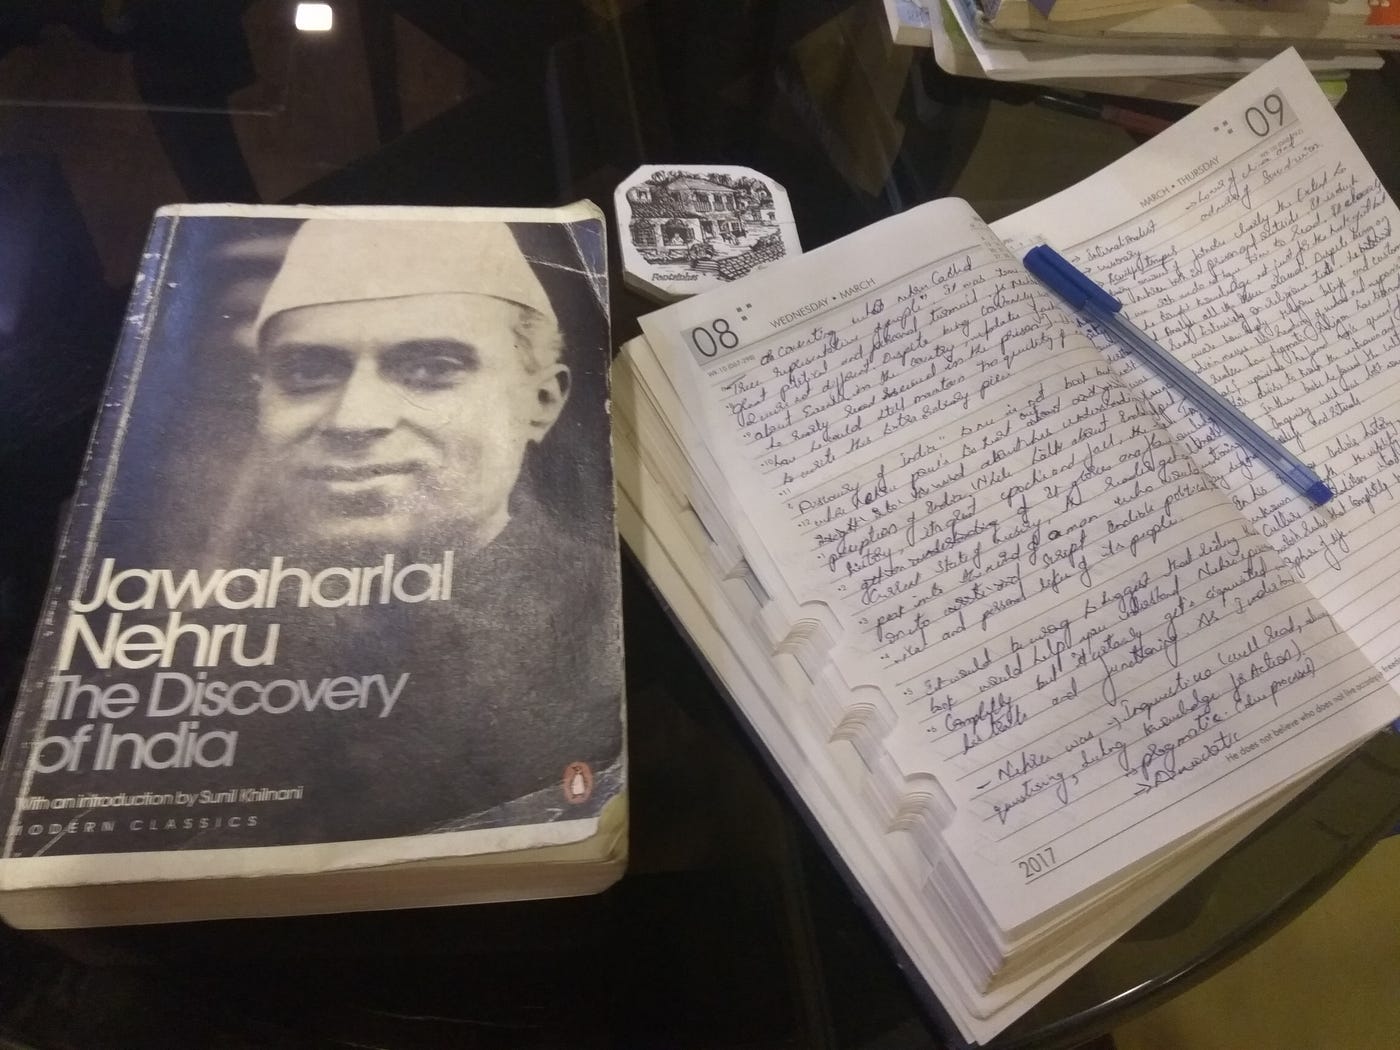 voyage of discovery by nehru